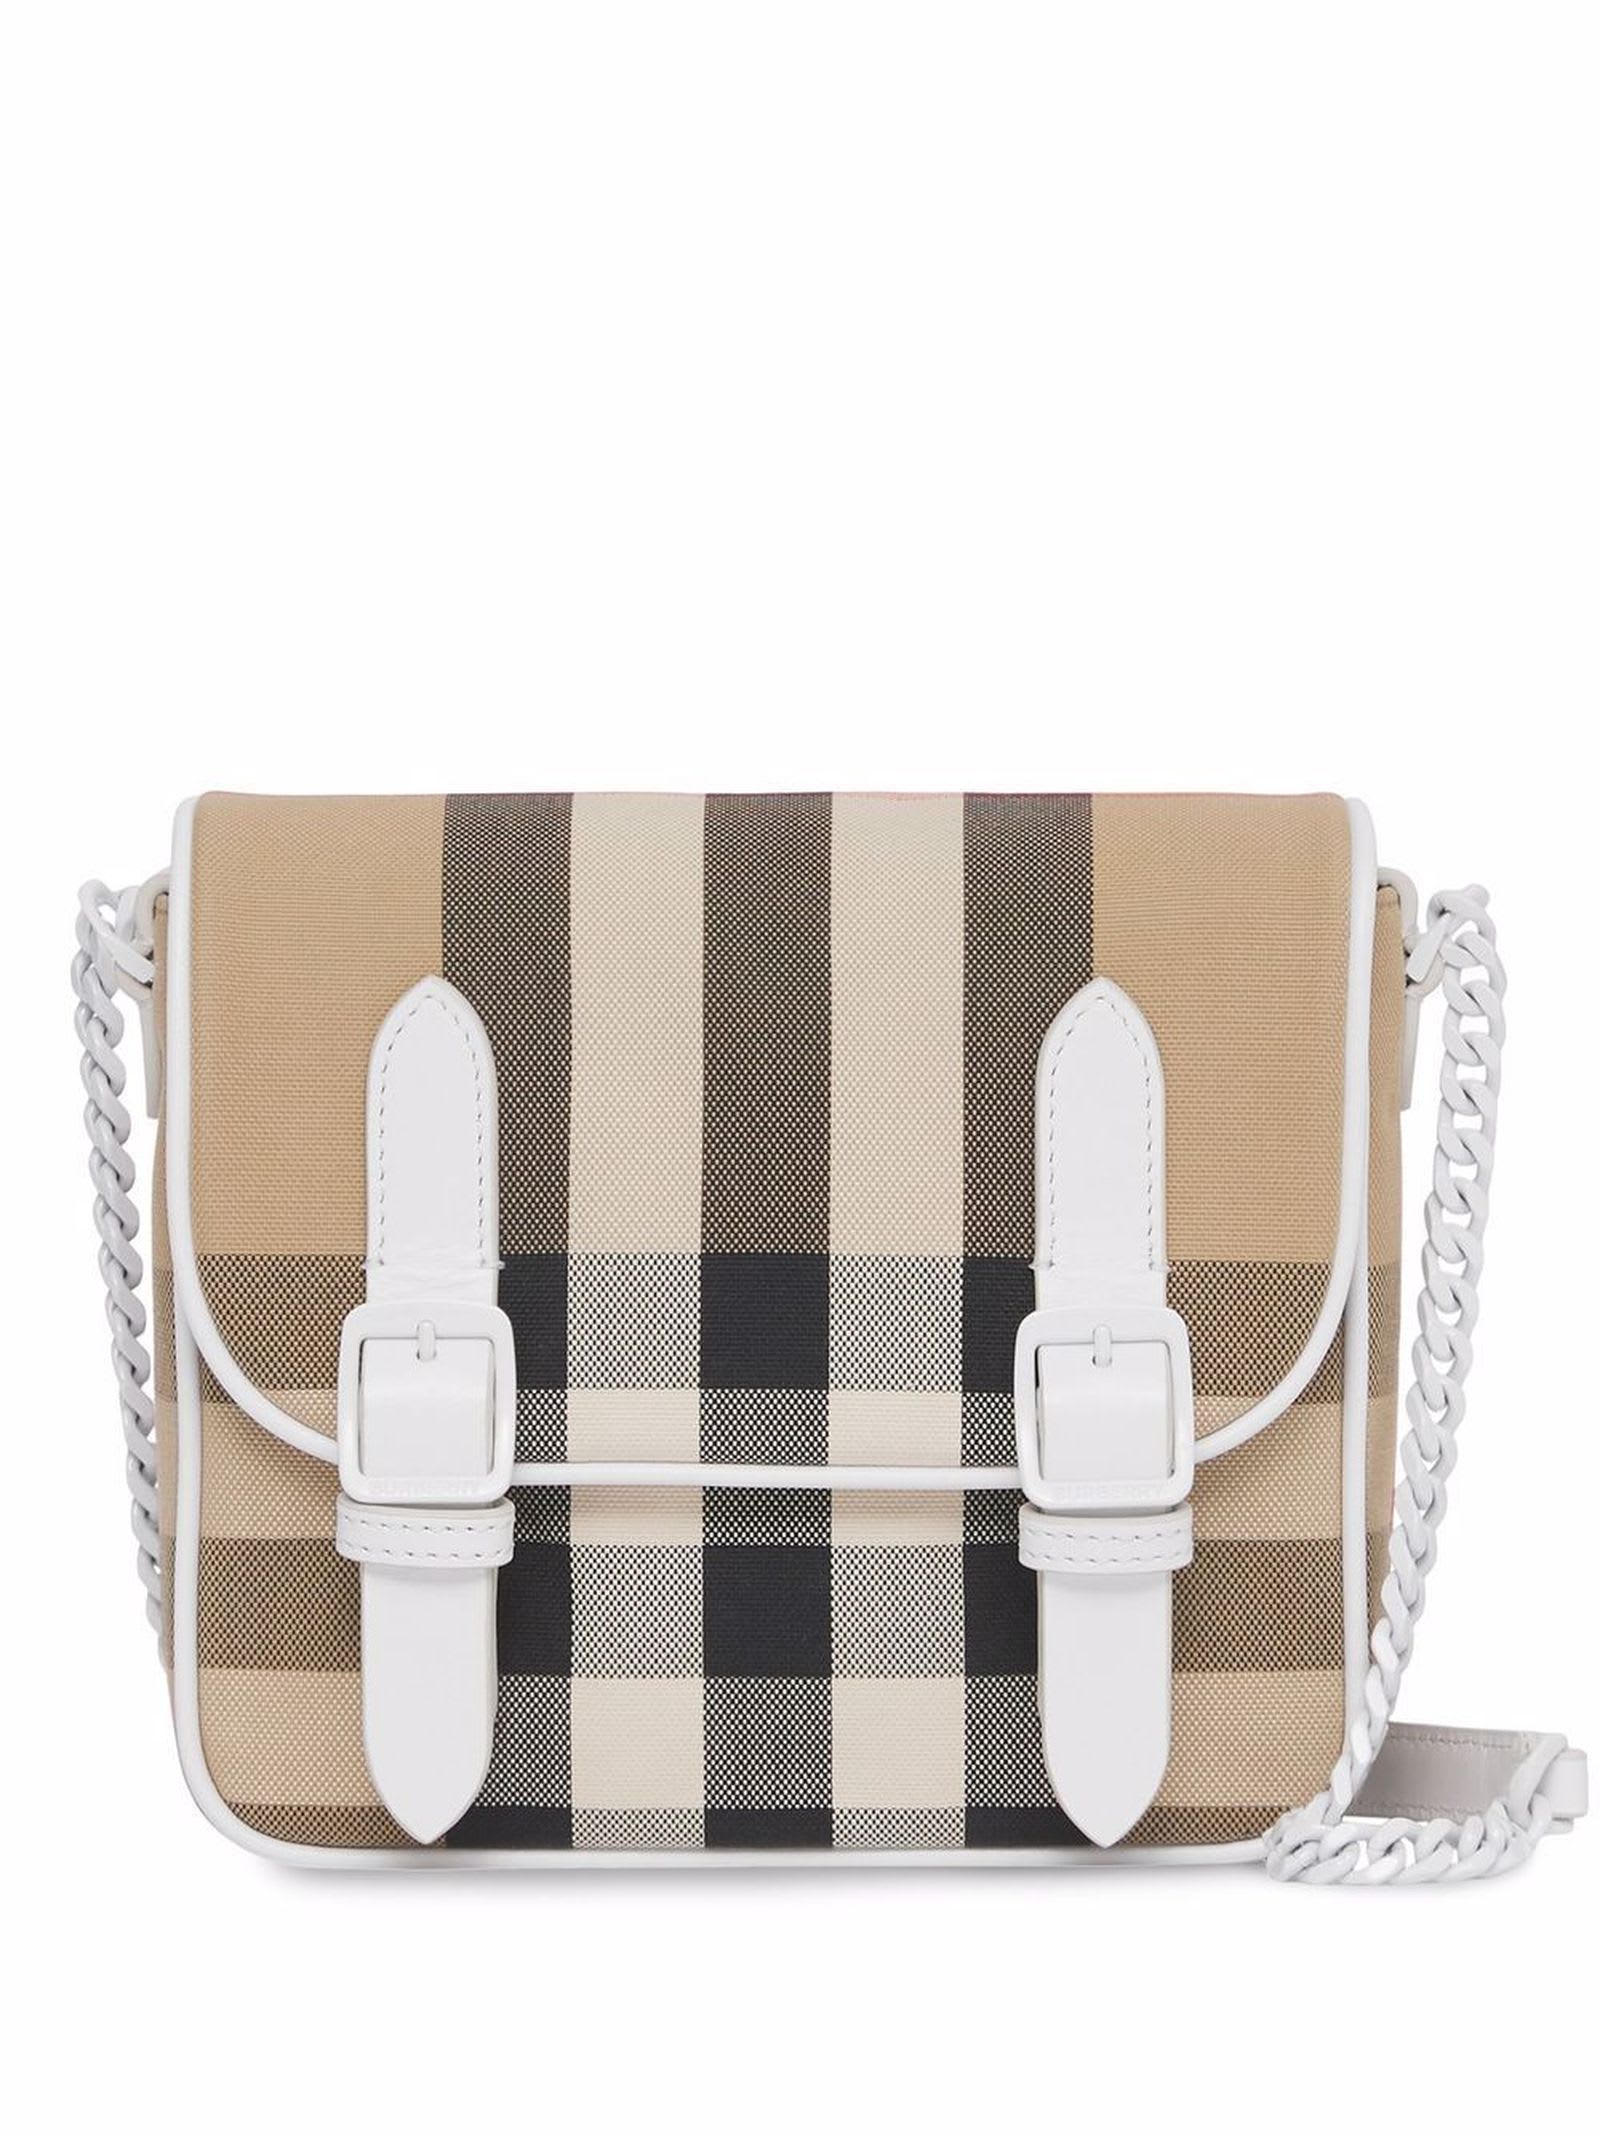 Burberry Beige Leather Bag